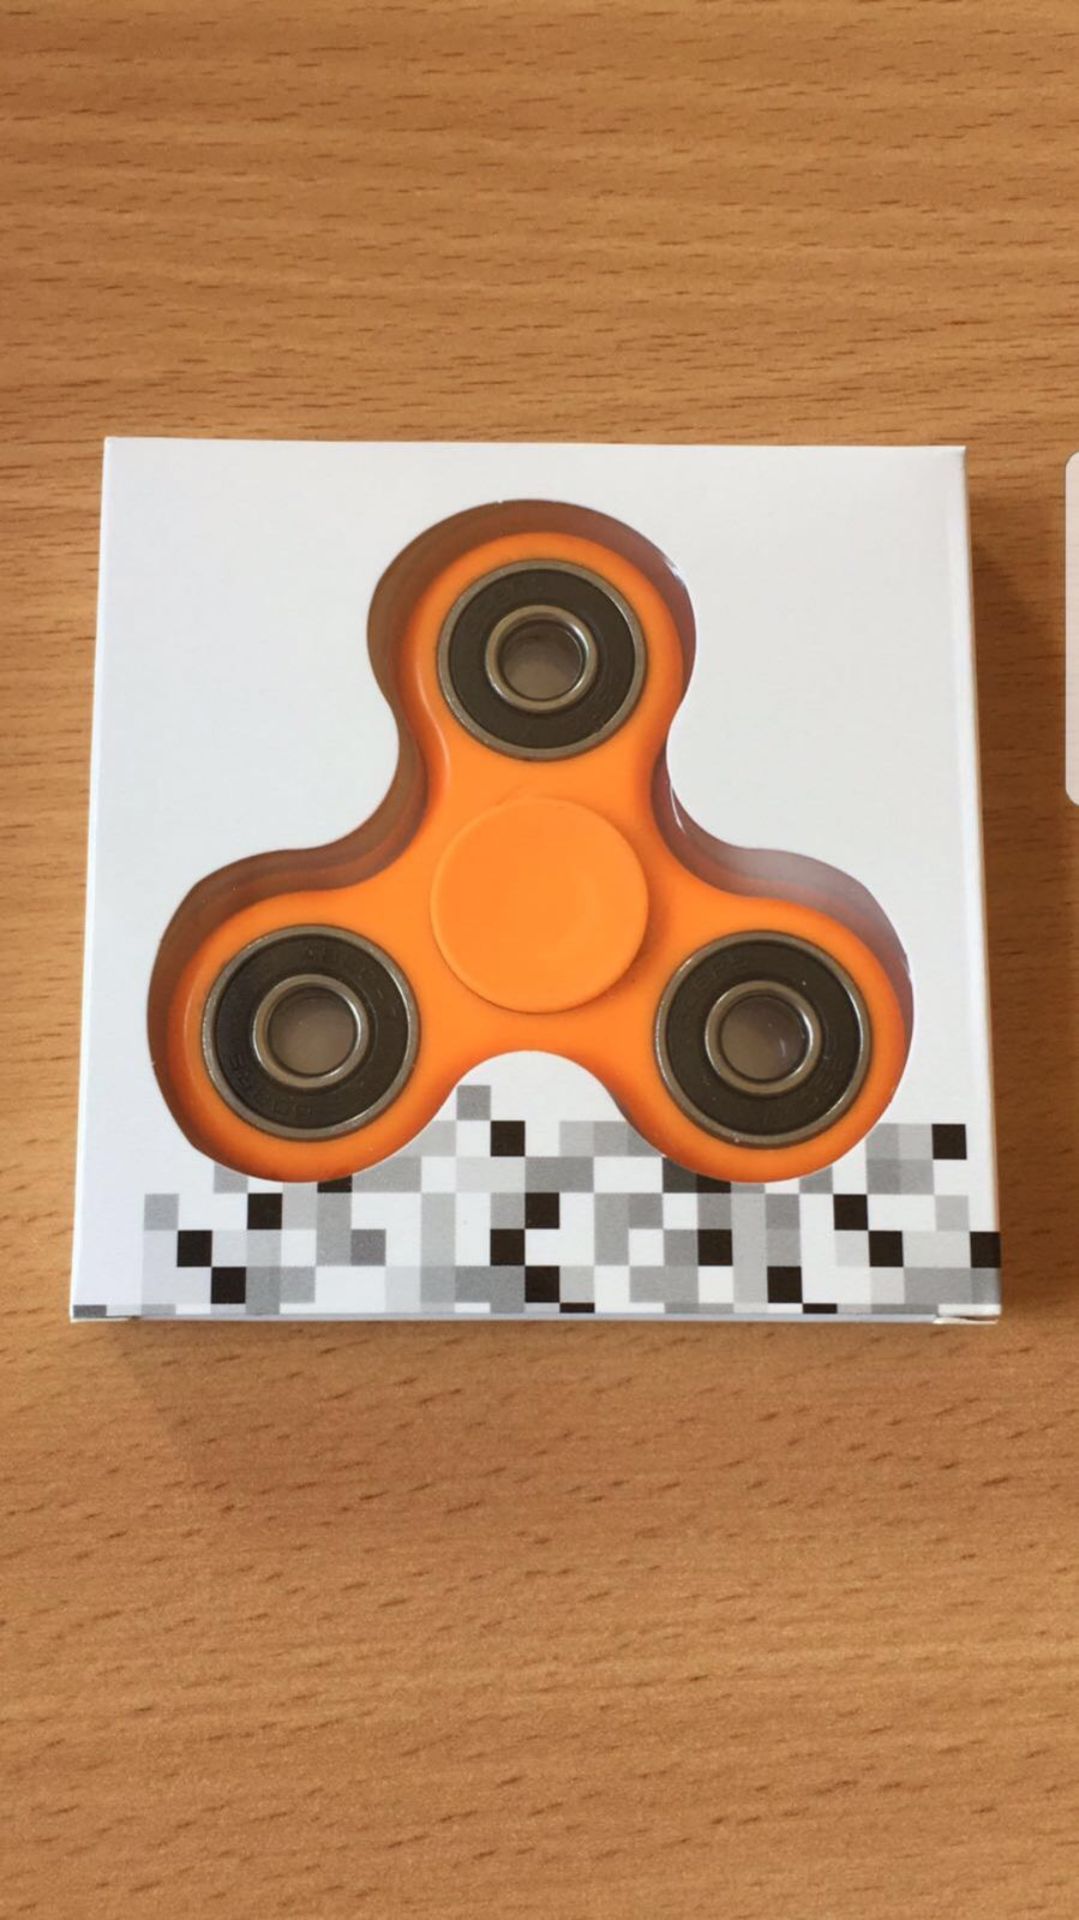 10 x Fidget Spinners. Various Colours Including: Black, Orange, Blue & Yellow. RRP £9.99 each. - Image 2 of 2